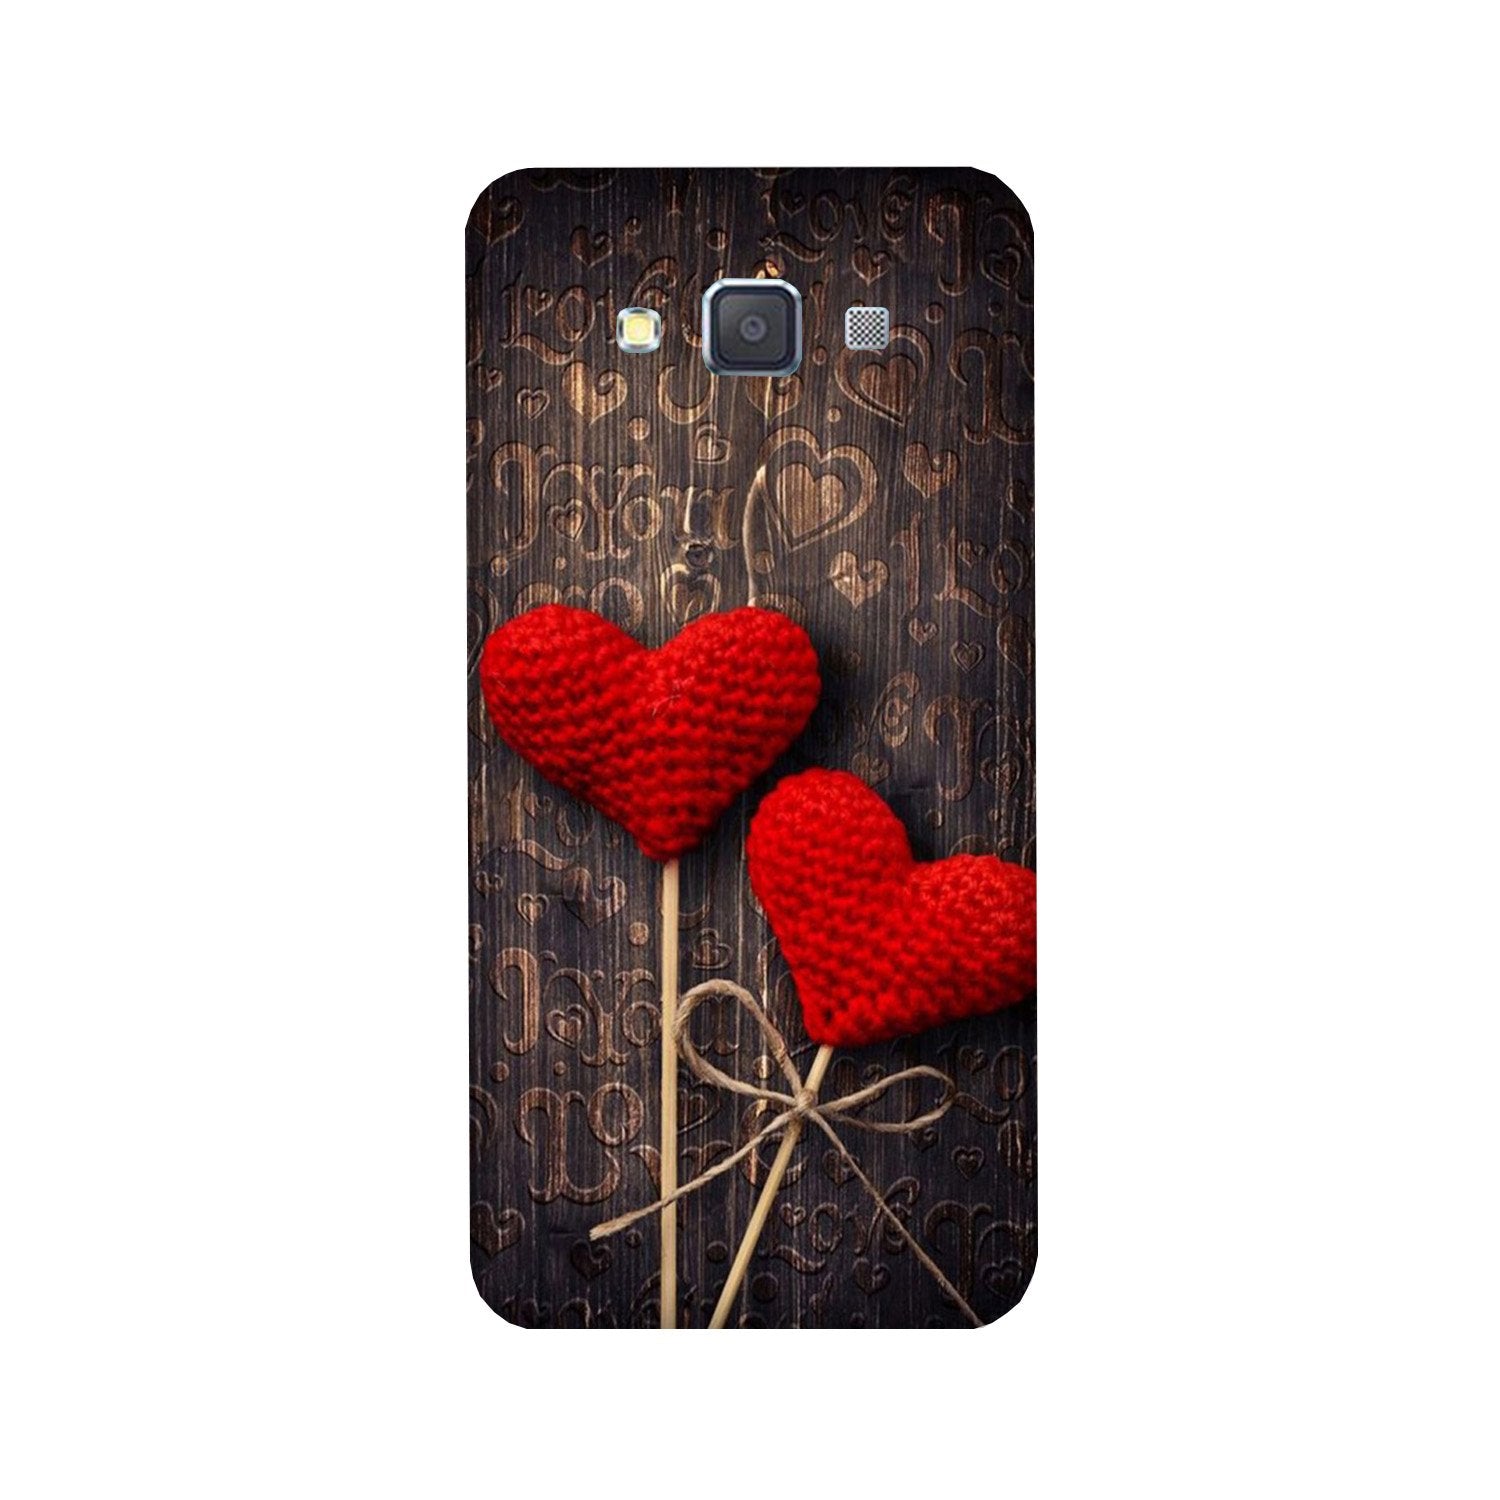 Red Hearts Case for Galaxy Grand 2